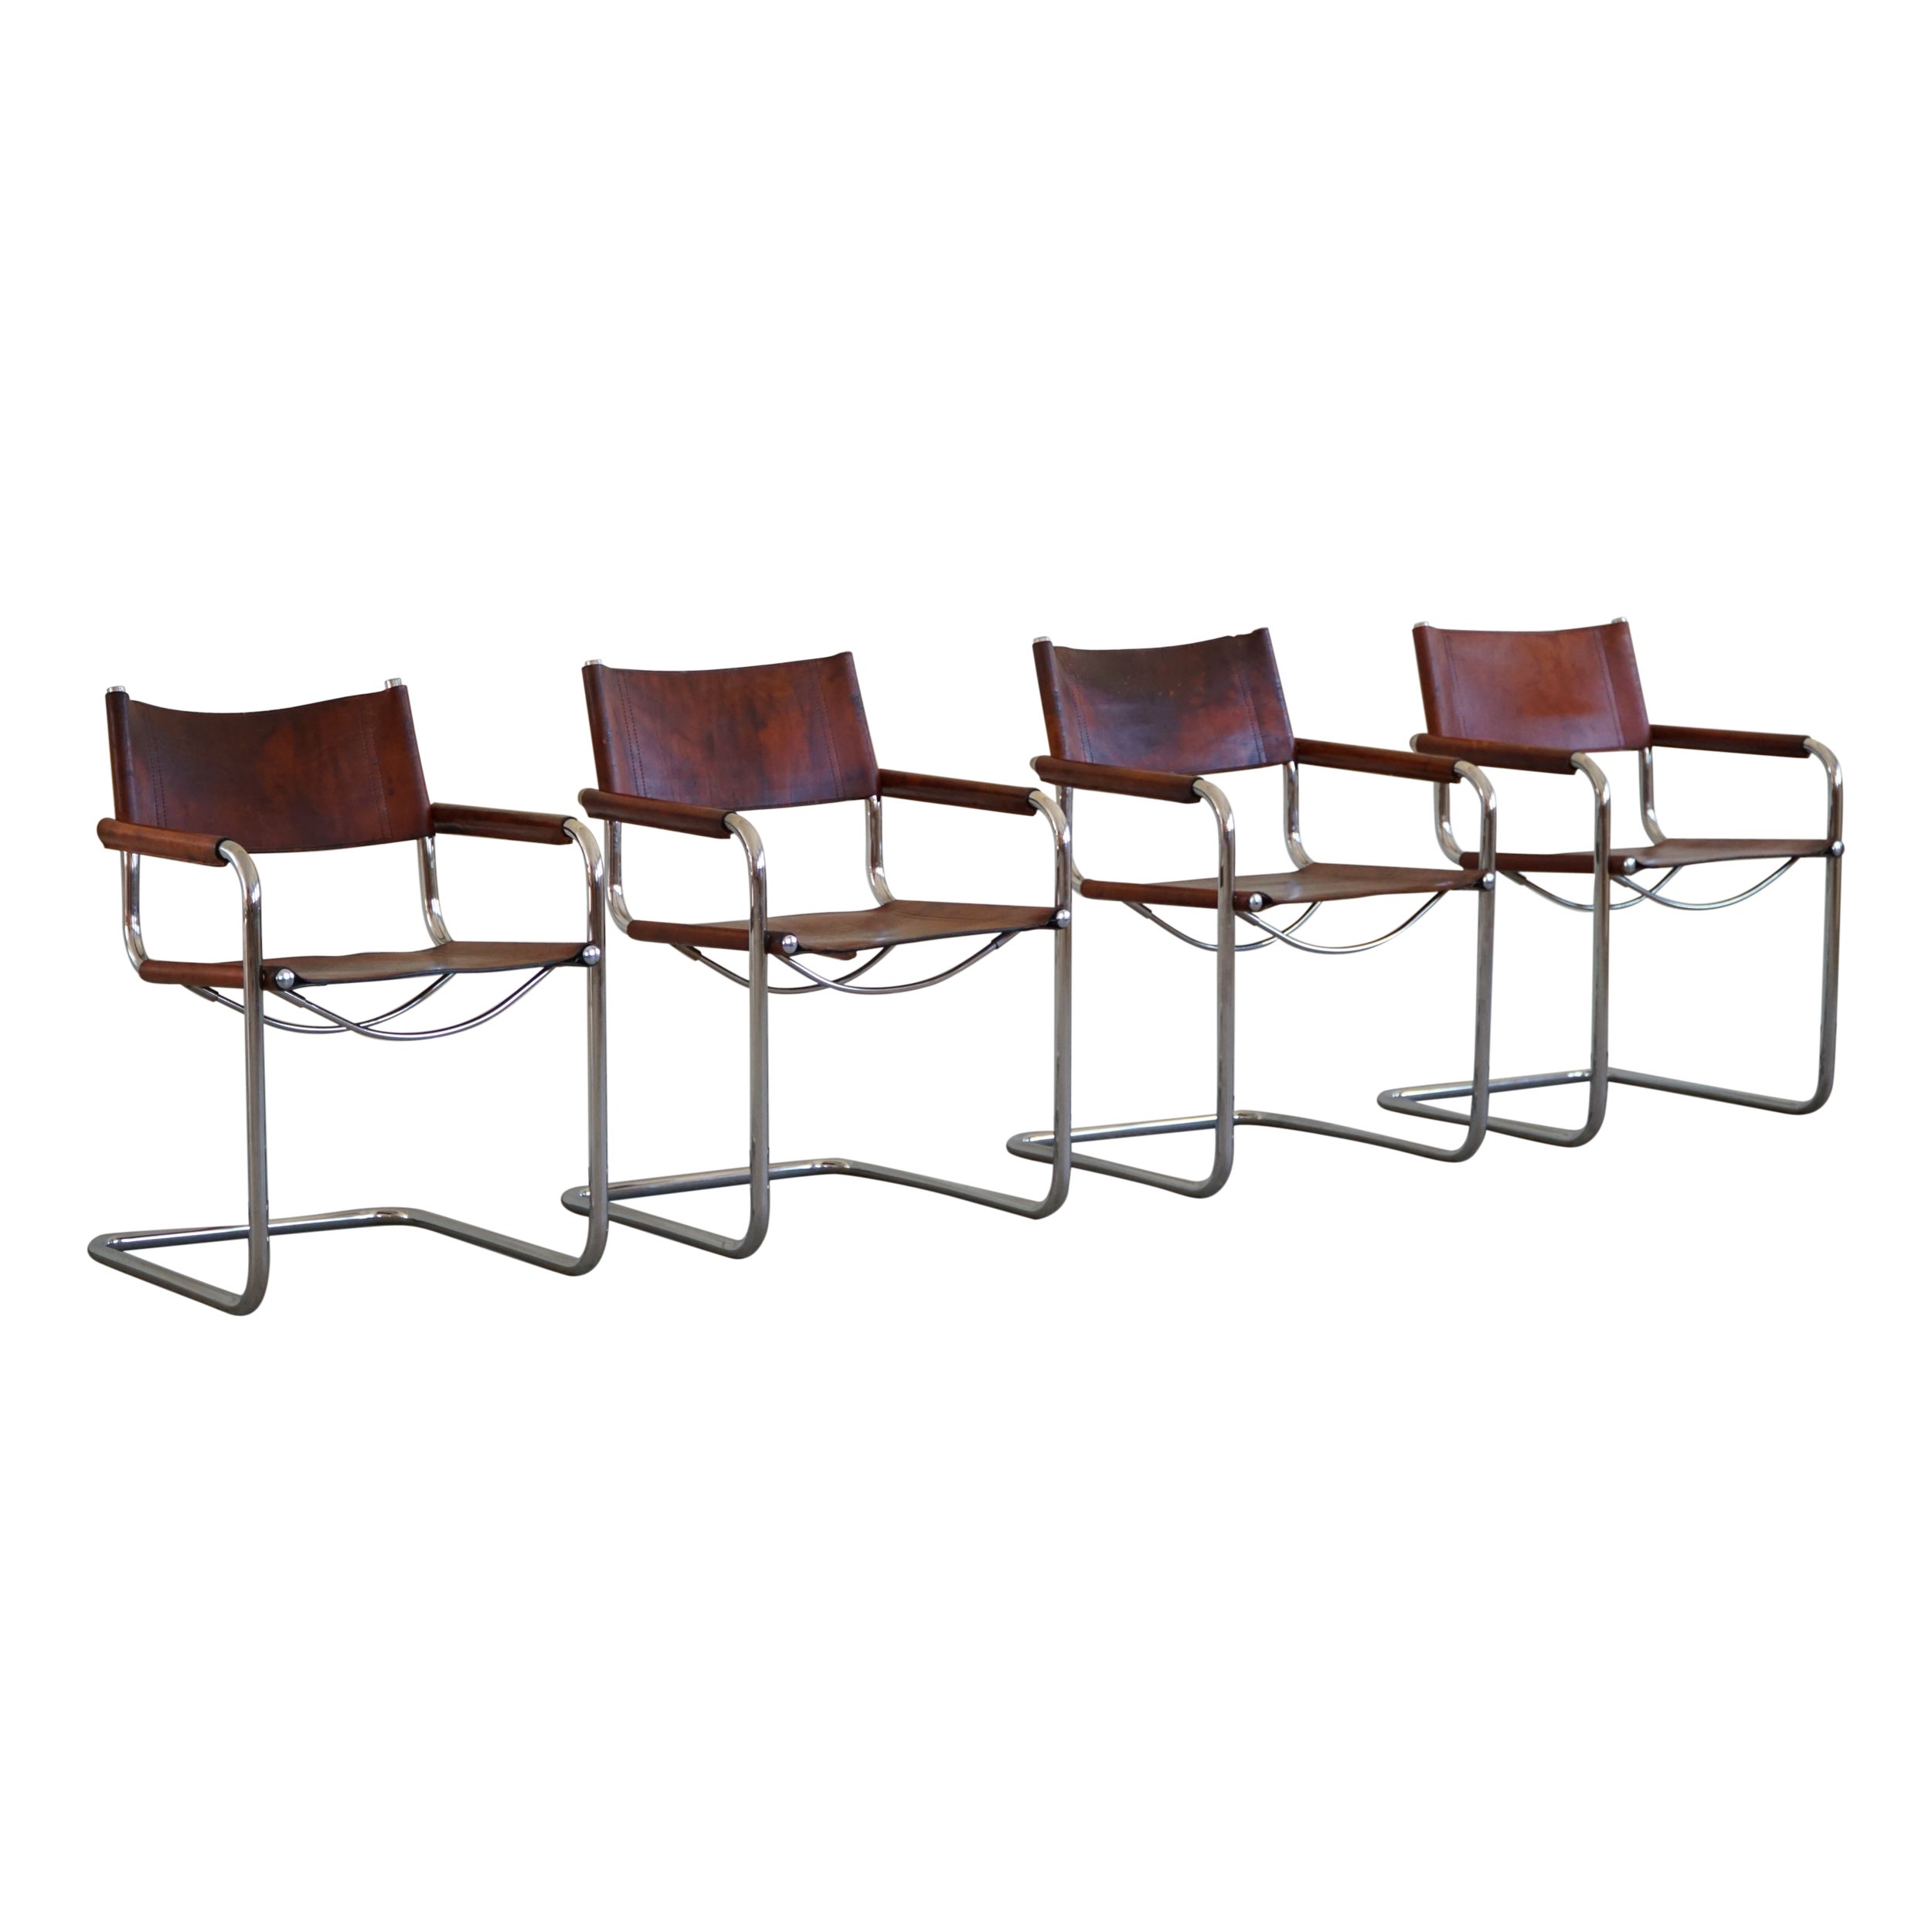 Set of 4 Vintage Cantilever Armchairs in Cognac Leather by Linea Veam, Italy 70s